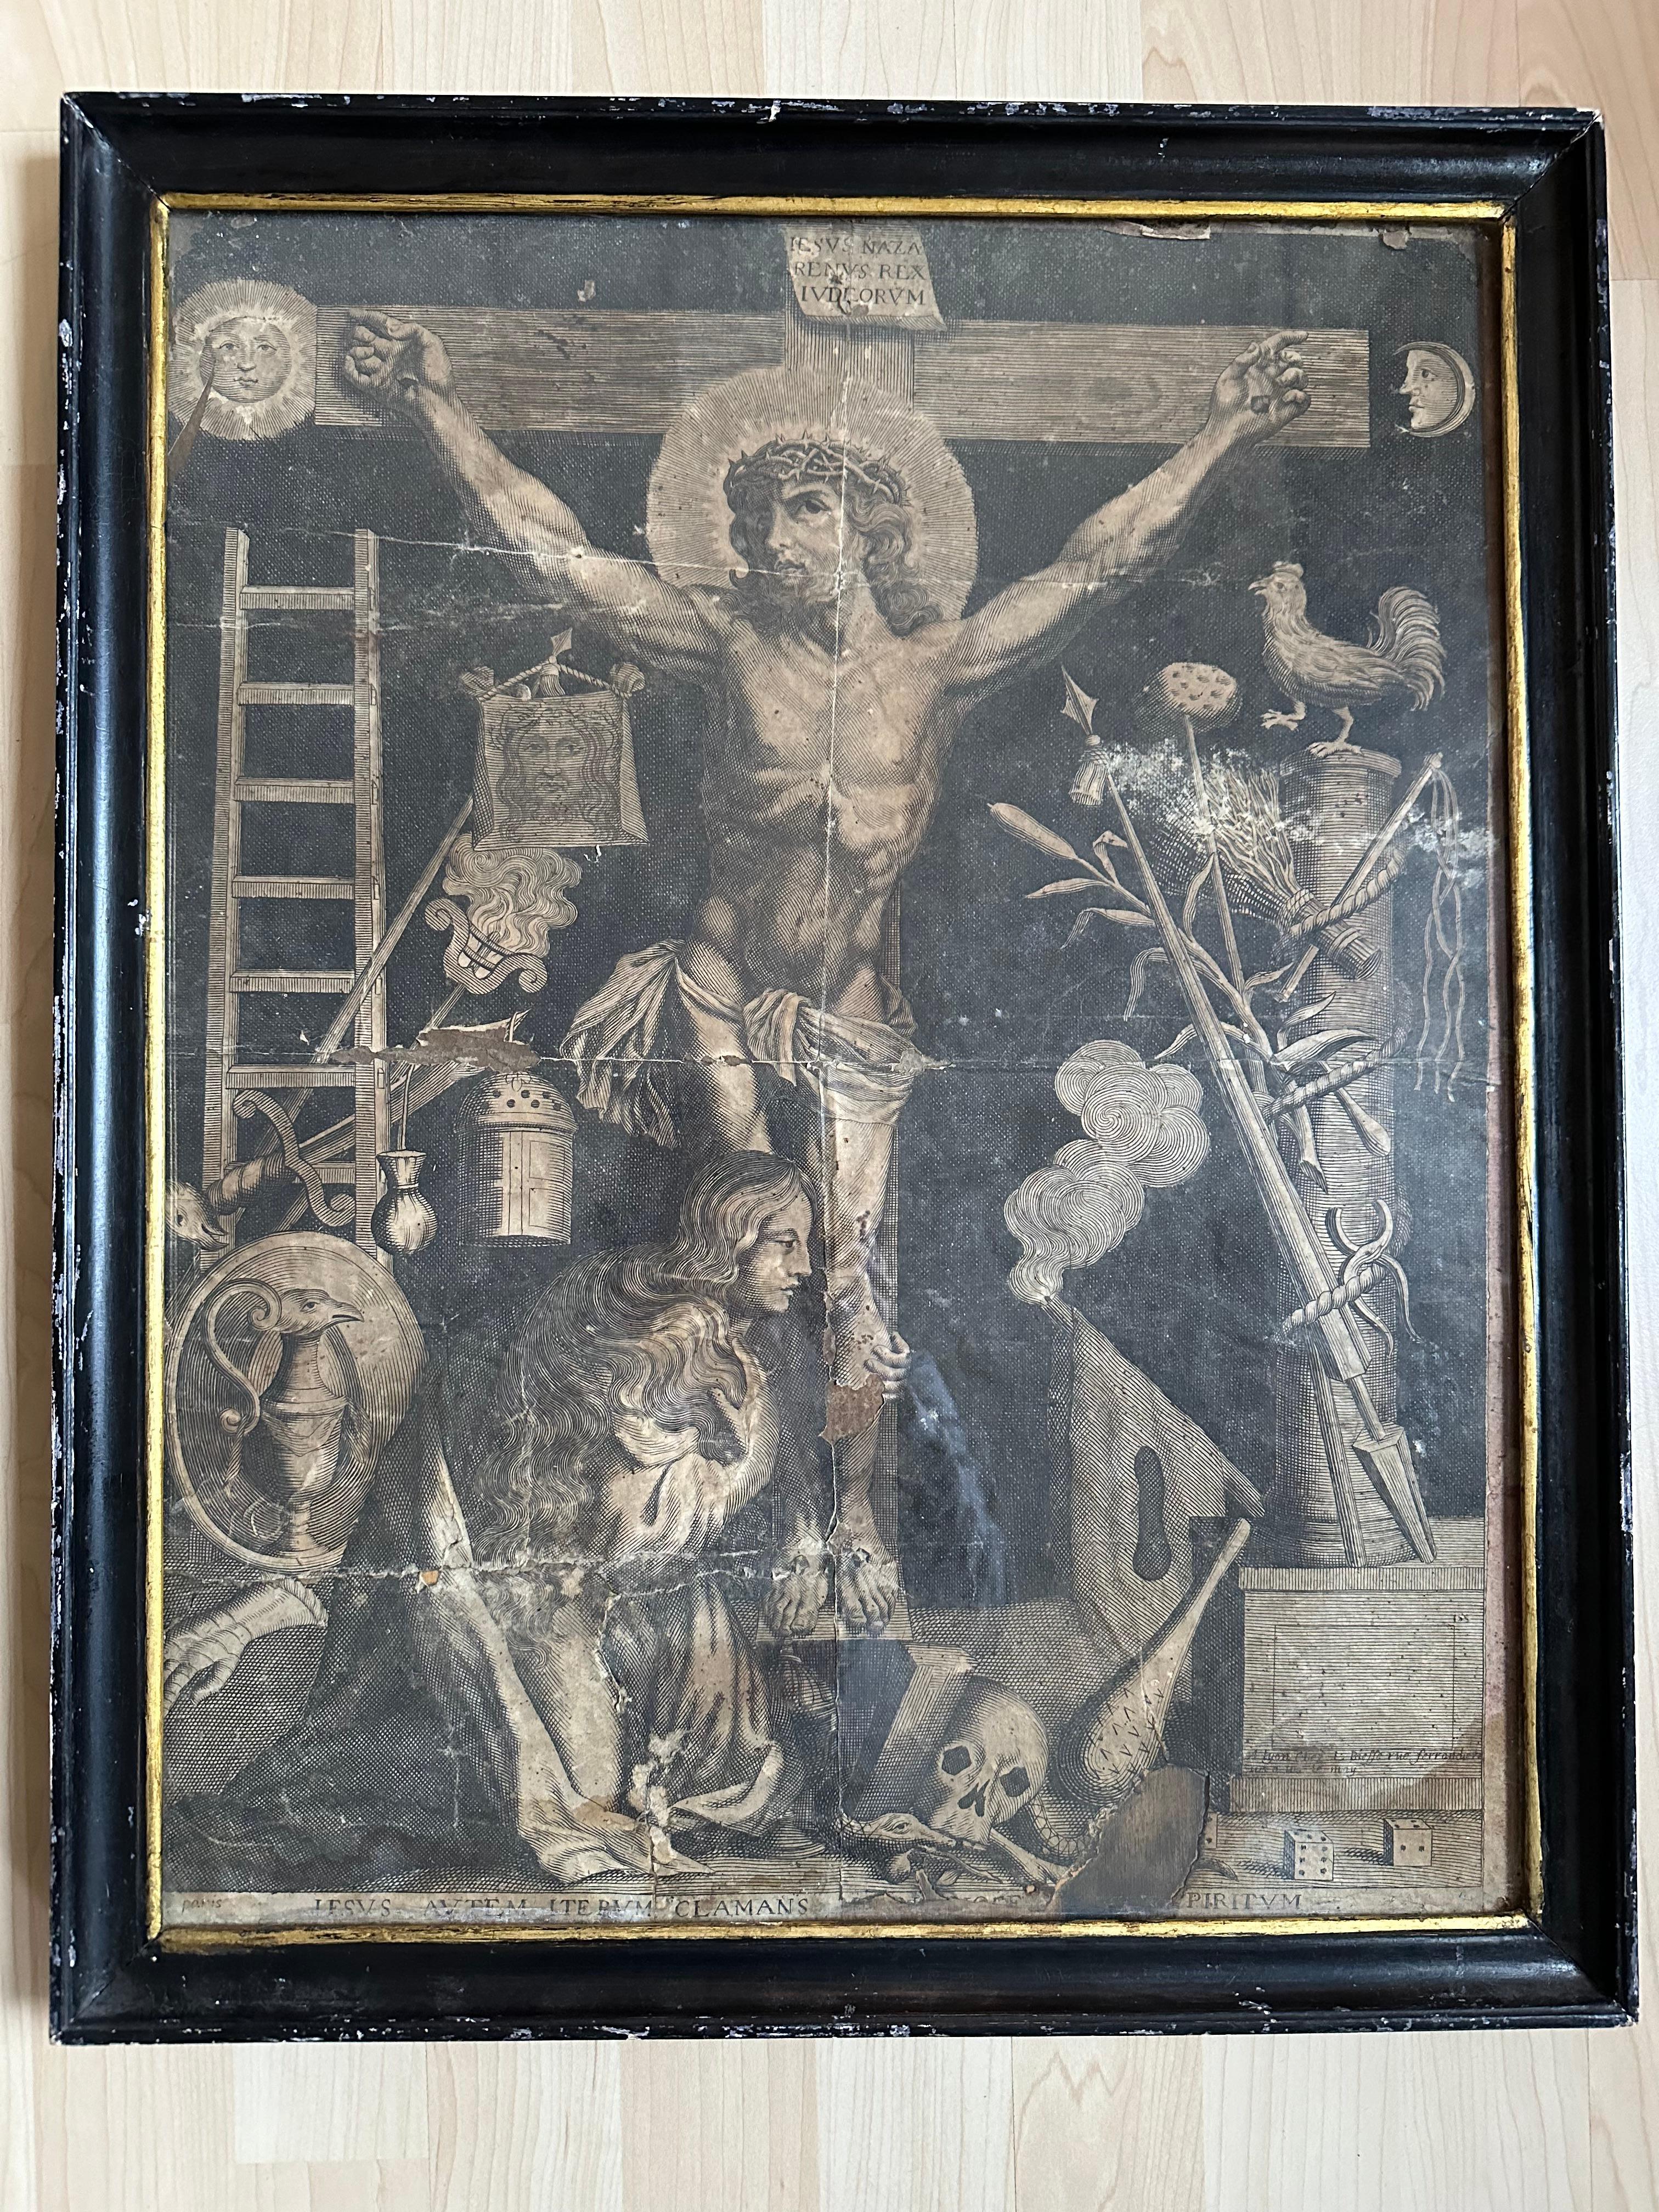 Explore the profound historical narrative captured in this 18th-century French copper engraving from Paris, depicting the crucifixion of Jesus with Mary Magdalene. Rich in symbolism, this artwork offers a window into the religious and artistic